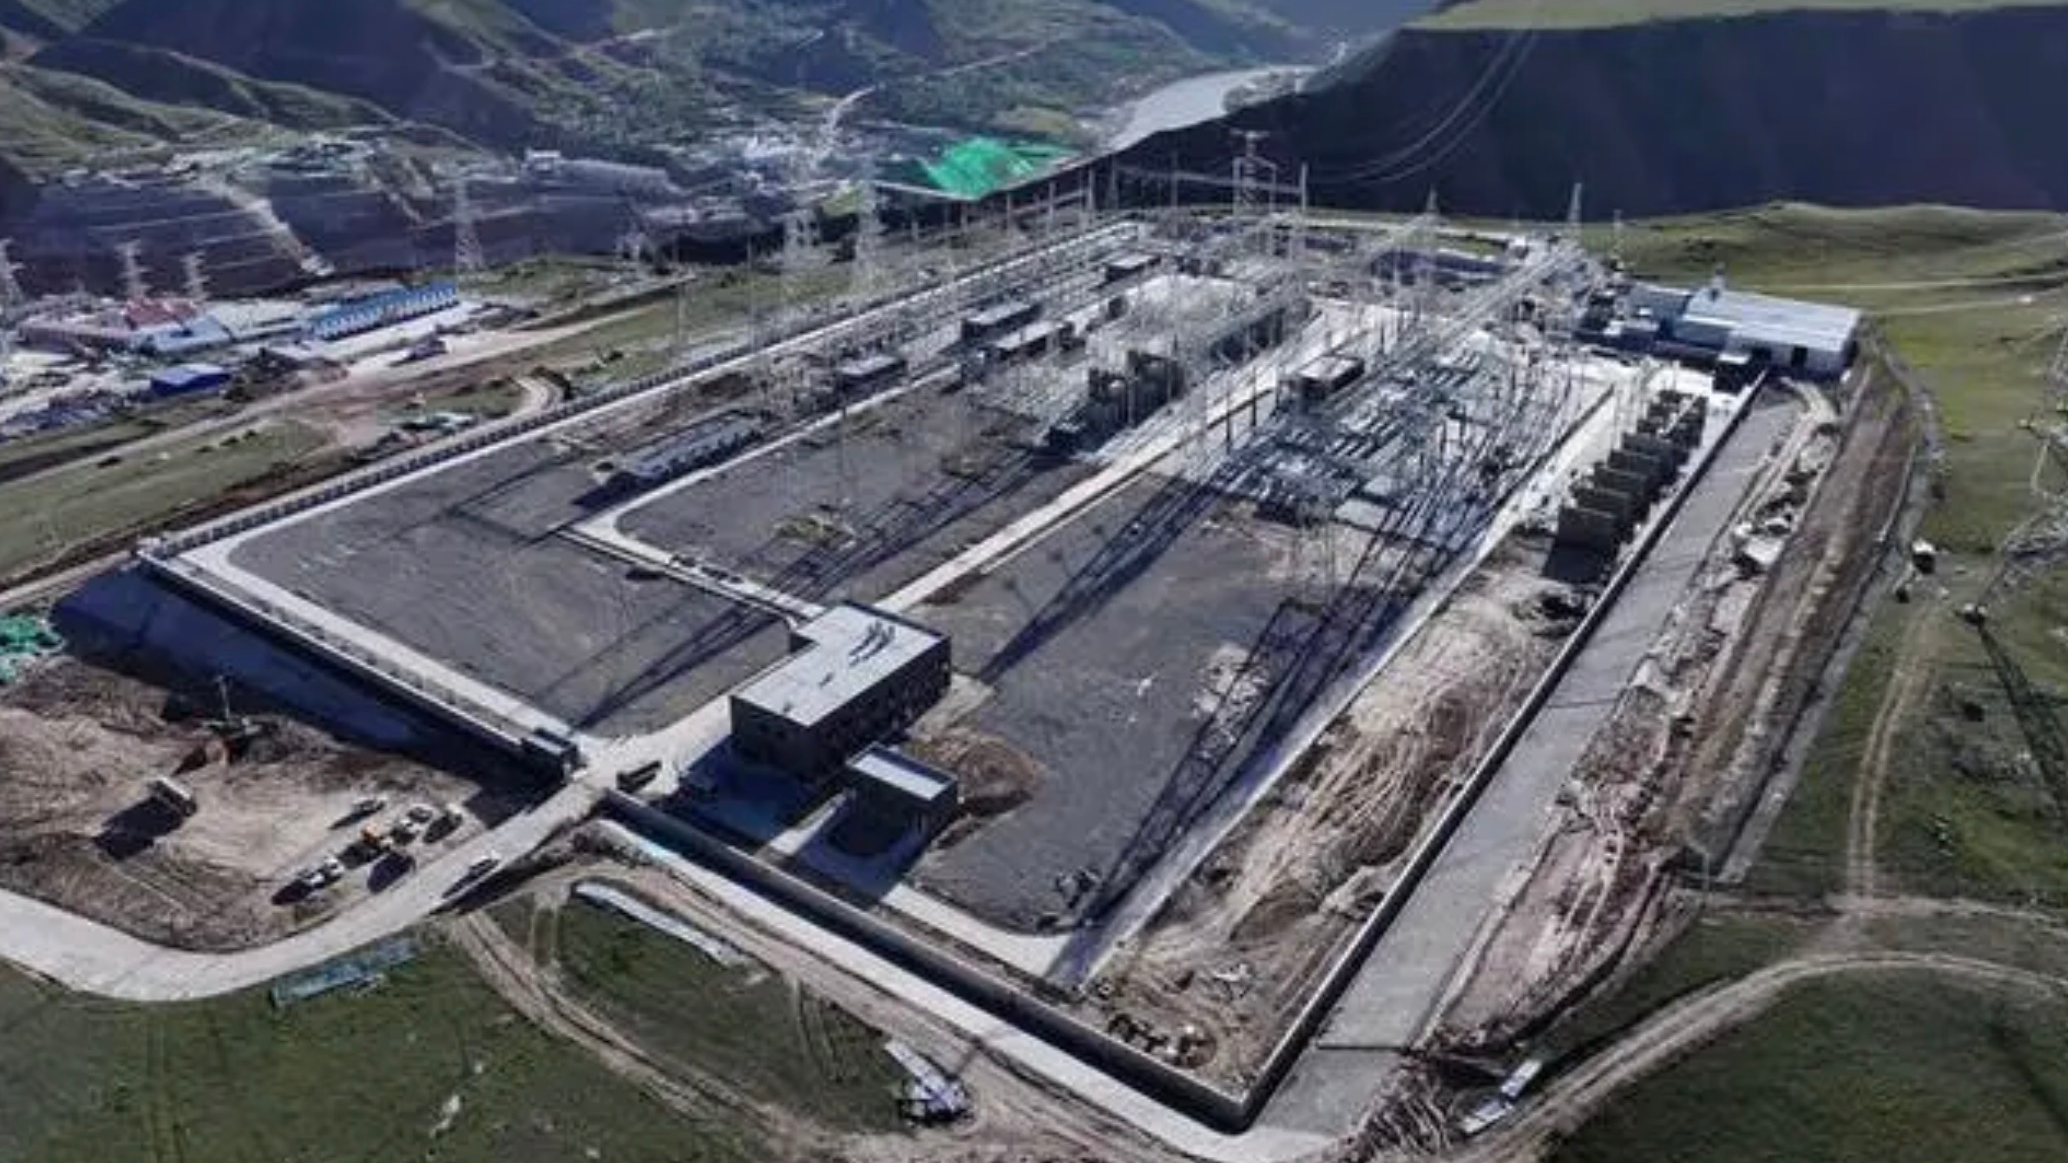 A 750-kV ultra-high voltage substation in China's northwest plateau province of Qinghai. /via CHN Energy Qinghai Maerdang Hydropower Station